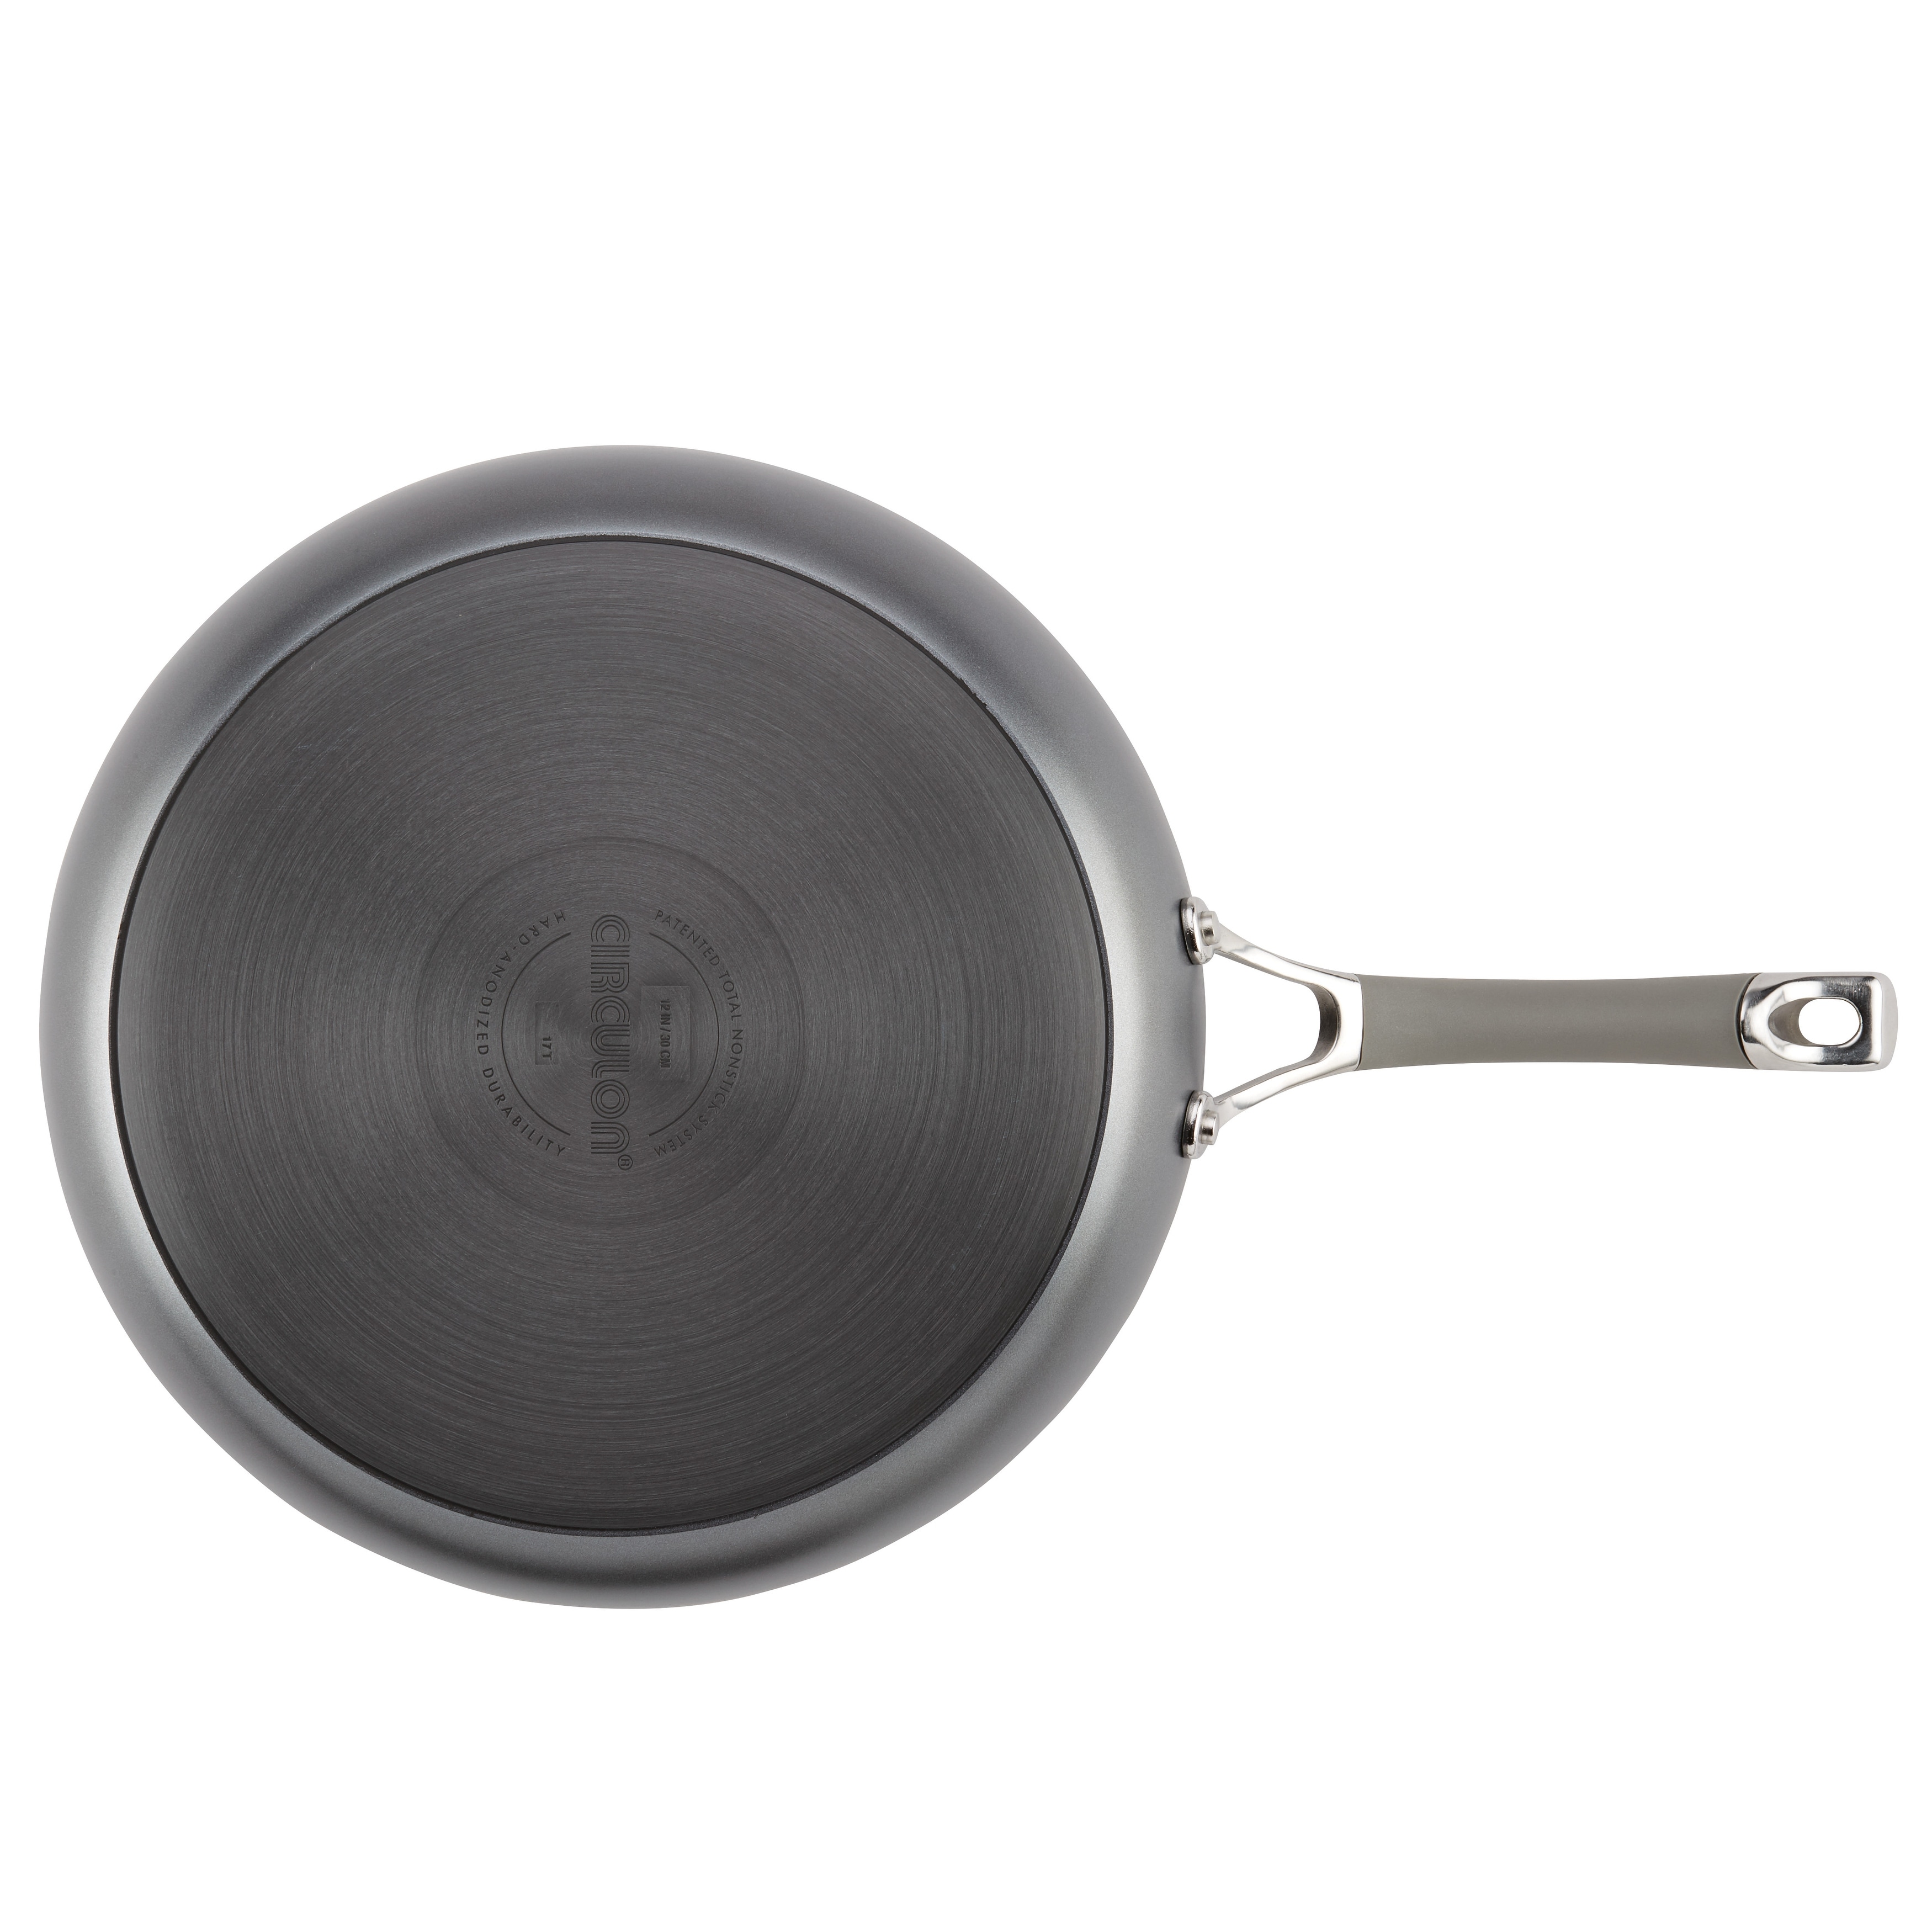 Circulon Elementum Hard-Anodized Nonstick Deep Frying Pan with Lid, 12-Inch, Gray